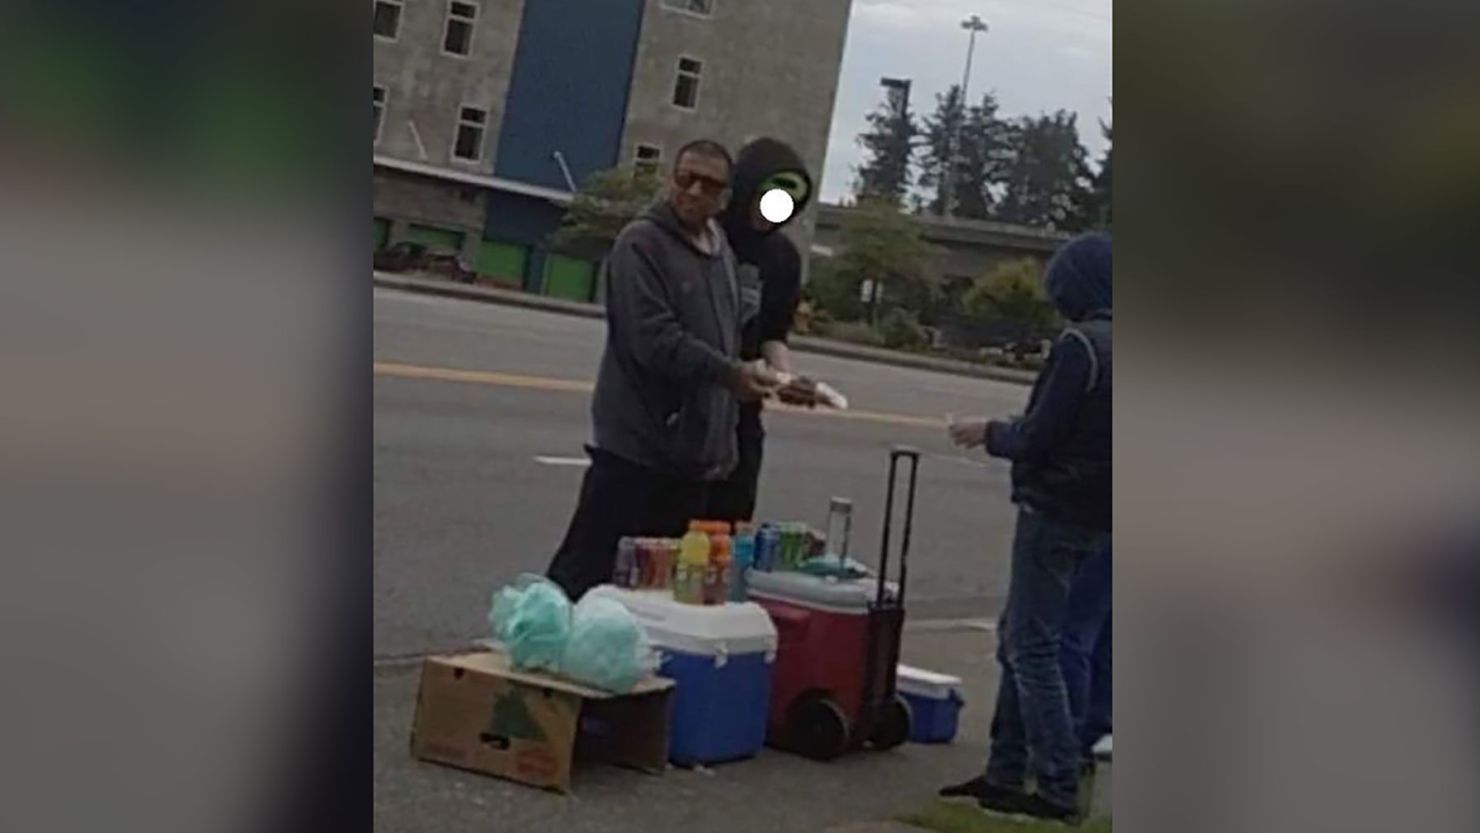 A man stiffed an 11-year-old boy with a fake $100 bill to buy lemonade from his stand. Everett Police has obscured a second individual in the photo. 